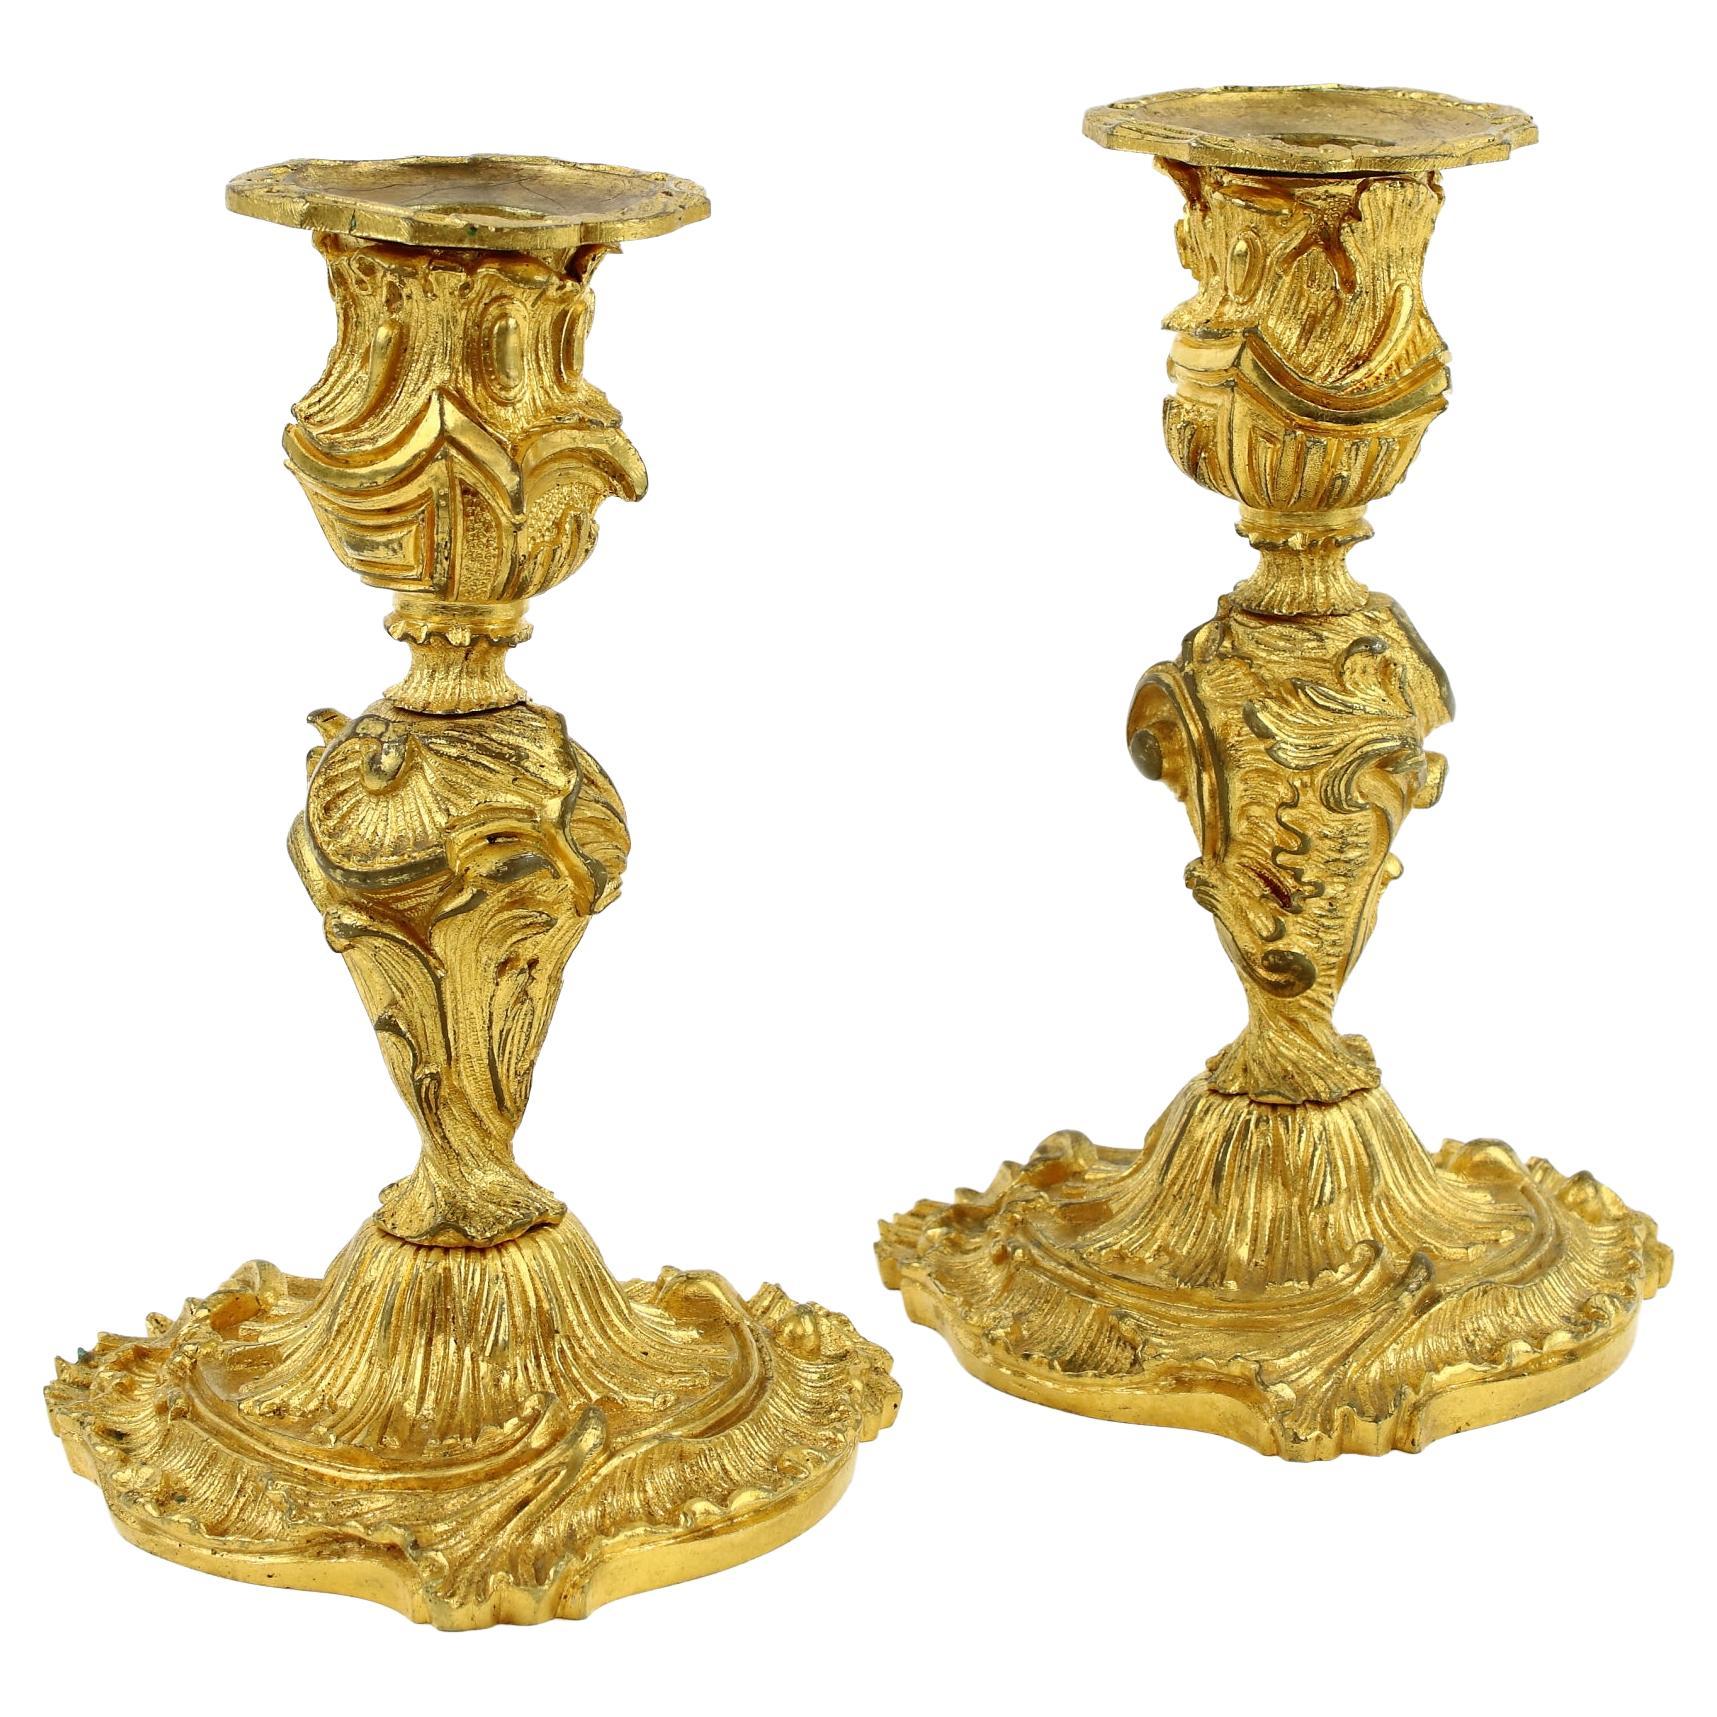 Pair of French 18th Century Small Louis XV Gilt Bronze Candlesticks